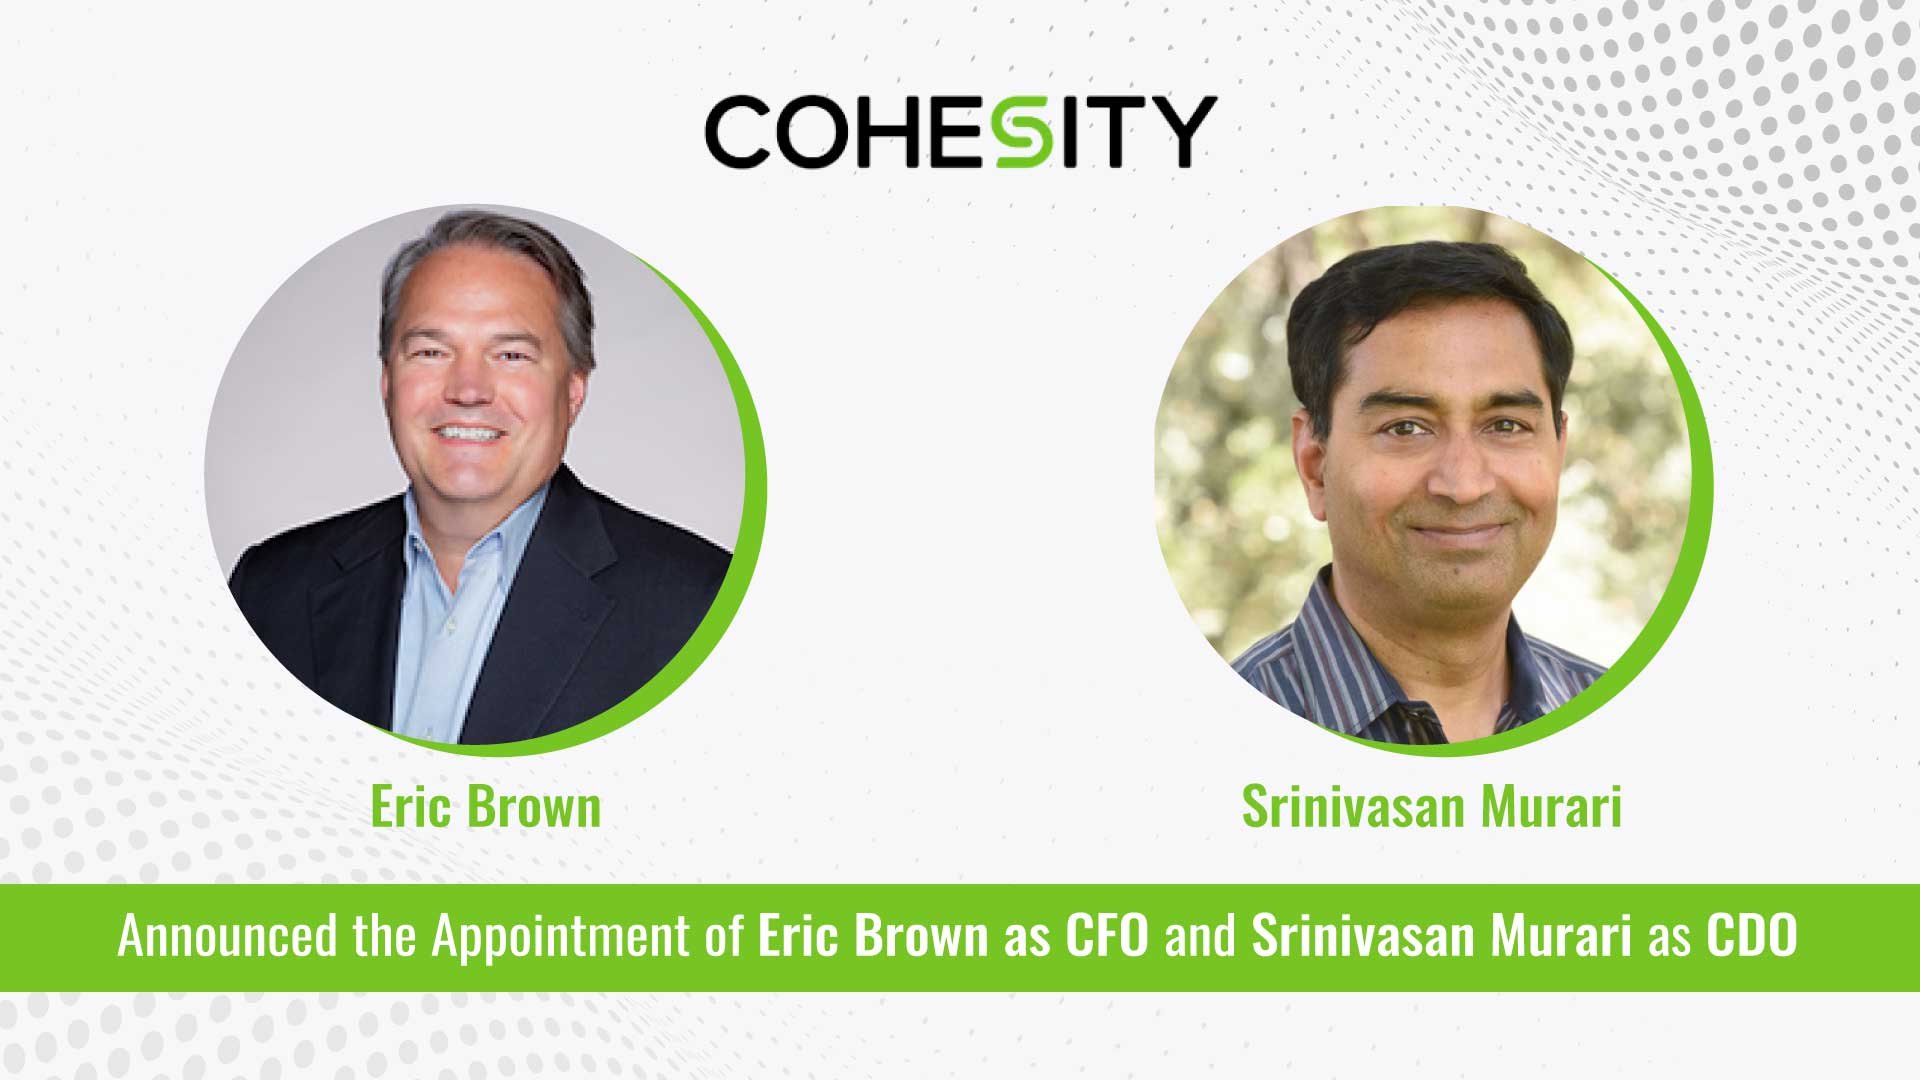 Cohesity Appoints Eric Brown as Chief Financial Officer and Srinivasan Murari as Chief Development Officer